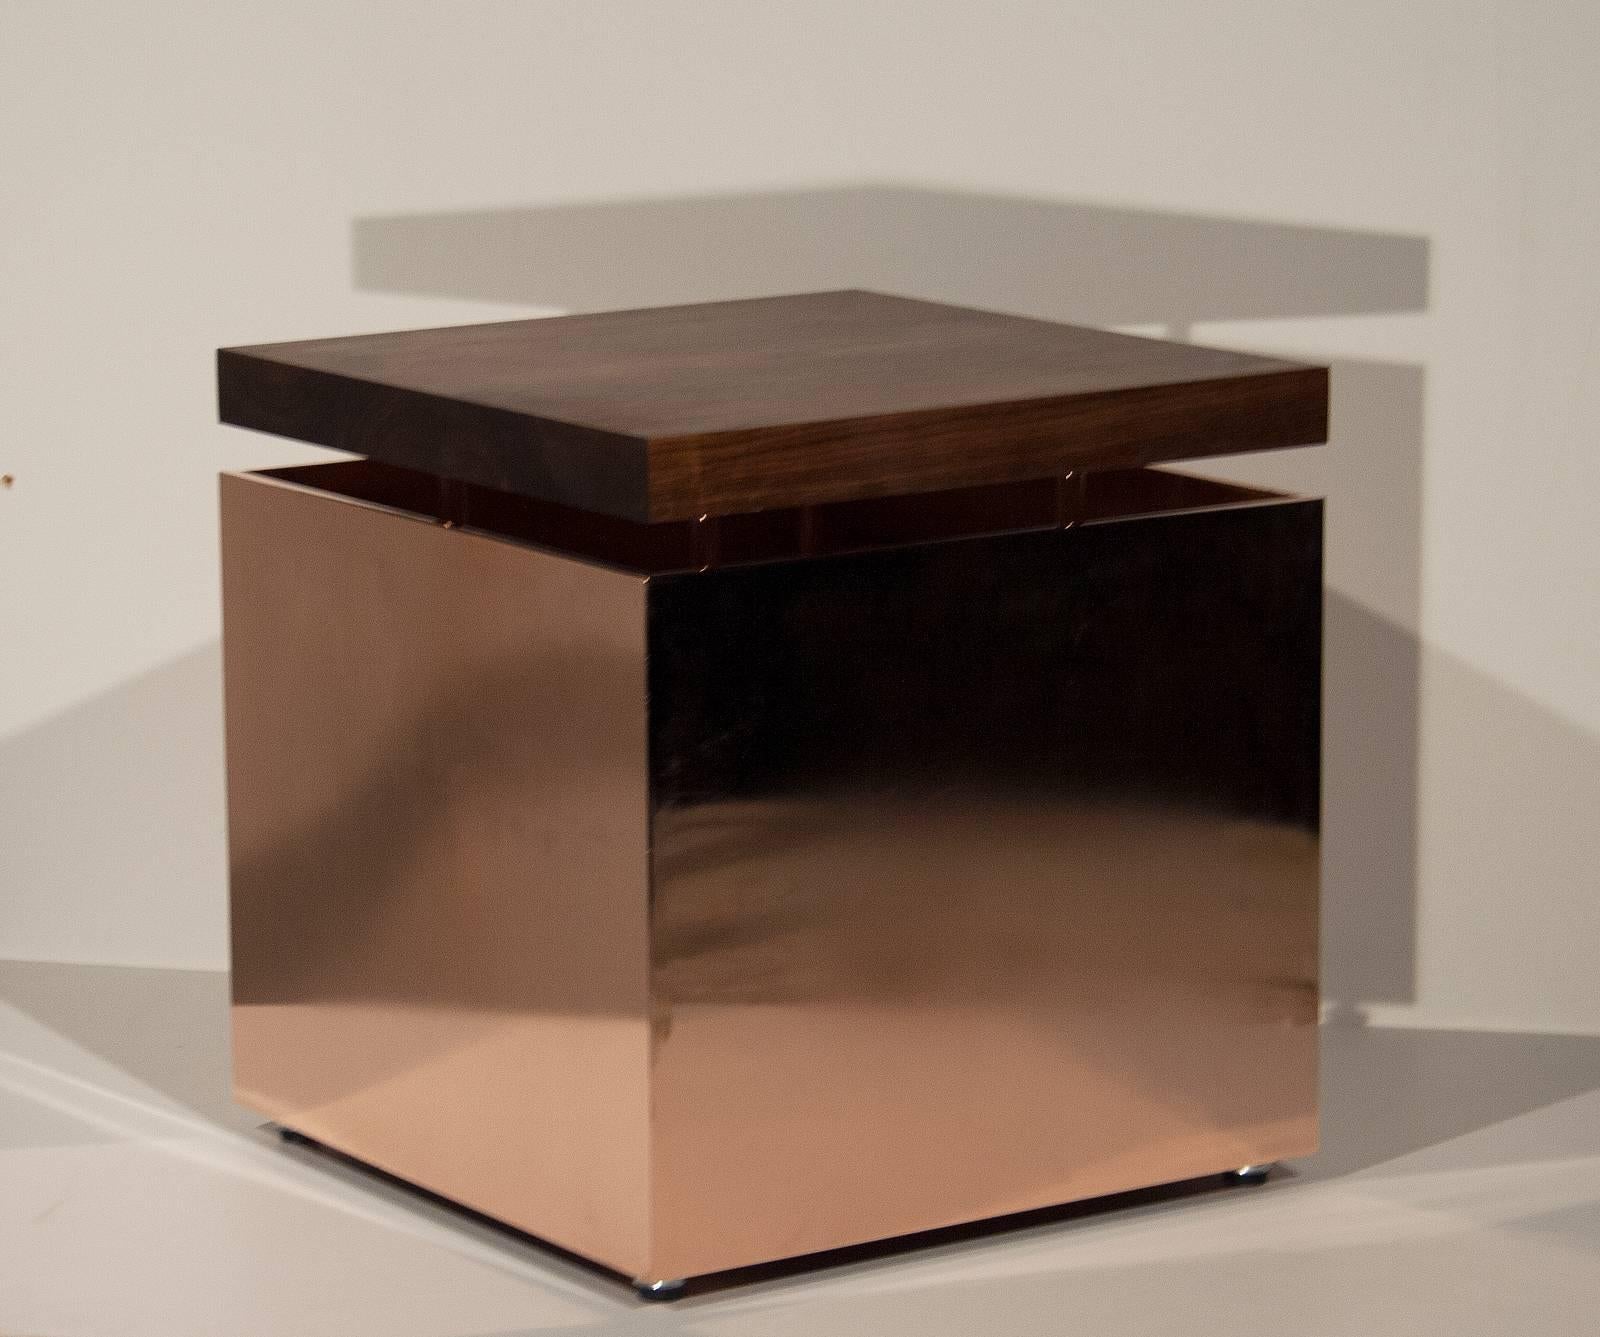 Pair of Contemporary Cube End Tables in Copper and Walnut by Brant Ritter For Sale 1